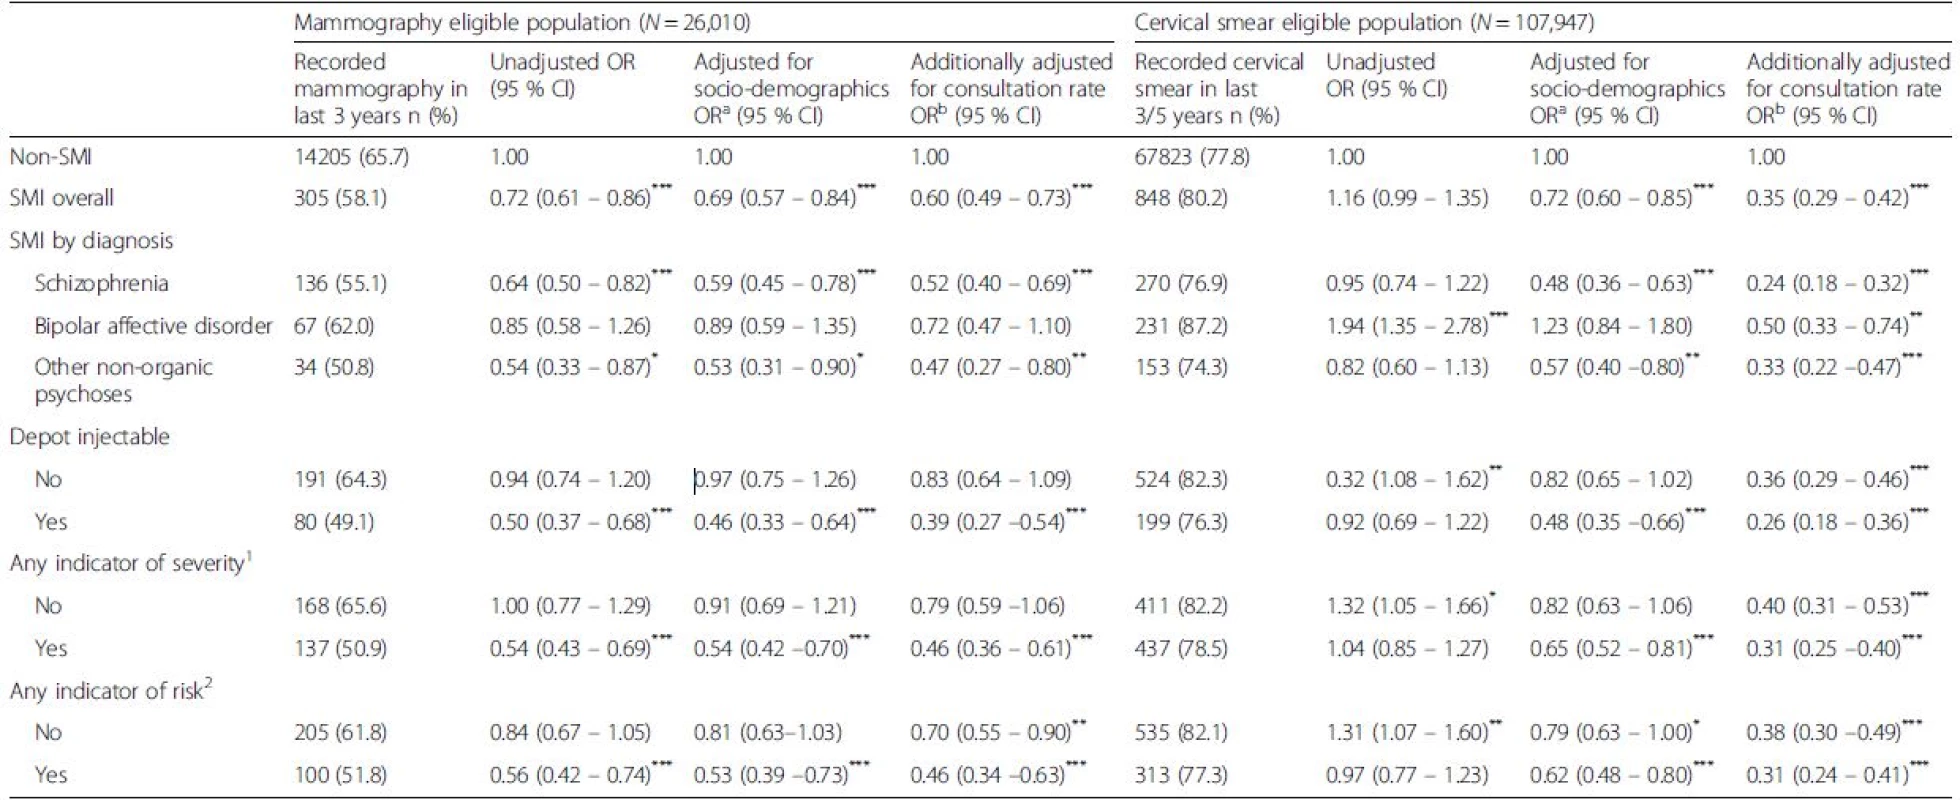 Associations between serious mental illness (SMI) status and recent receipt of breast and/or cervical screening overall and by SMI characteristic sub-group